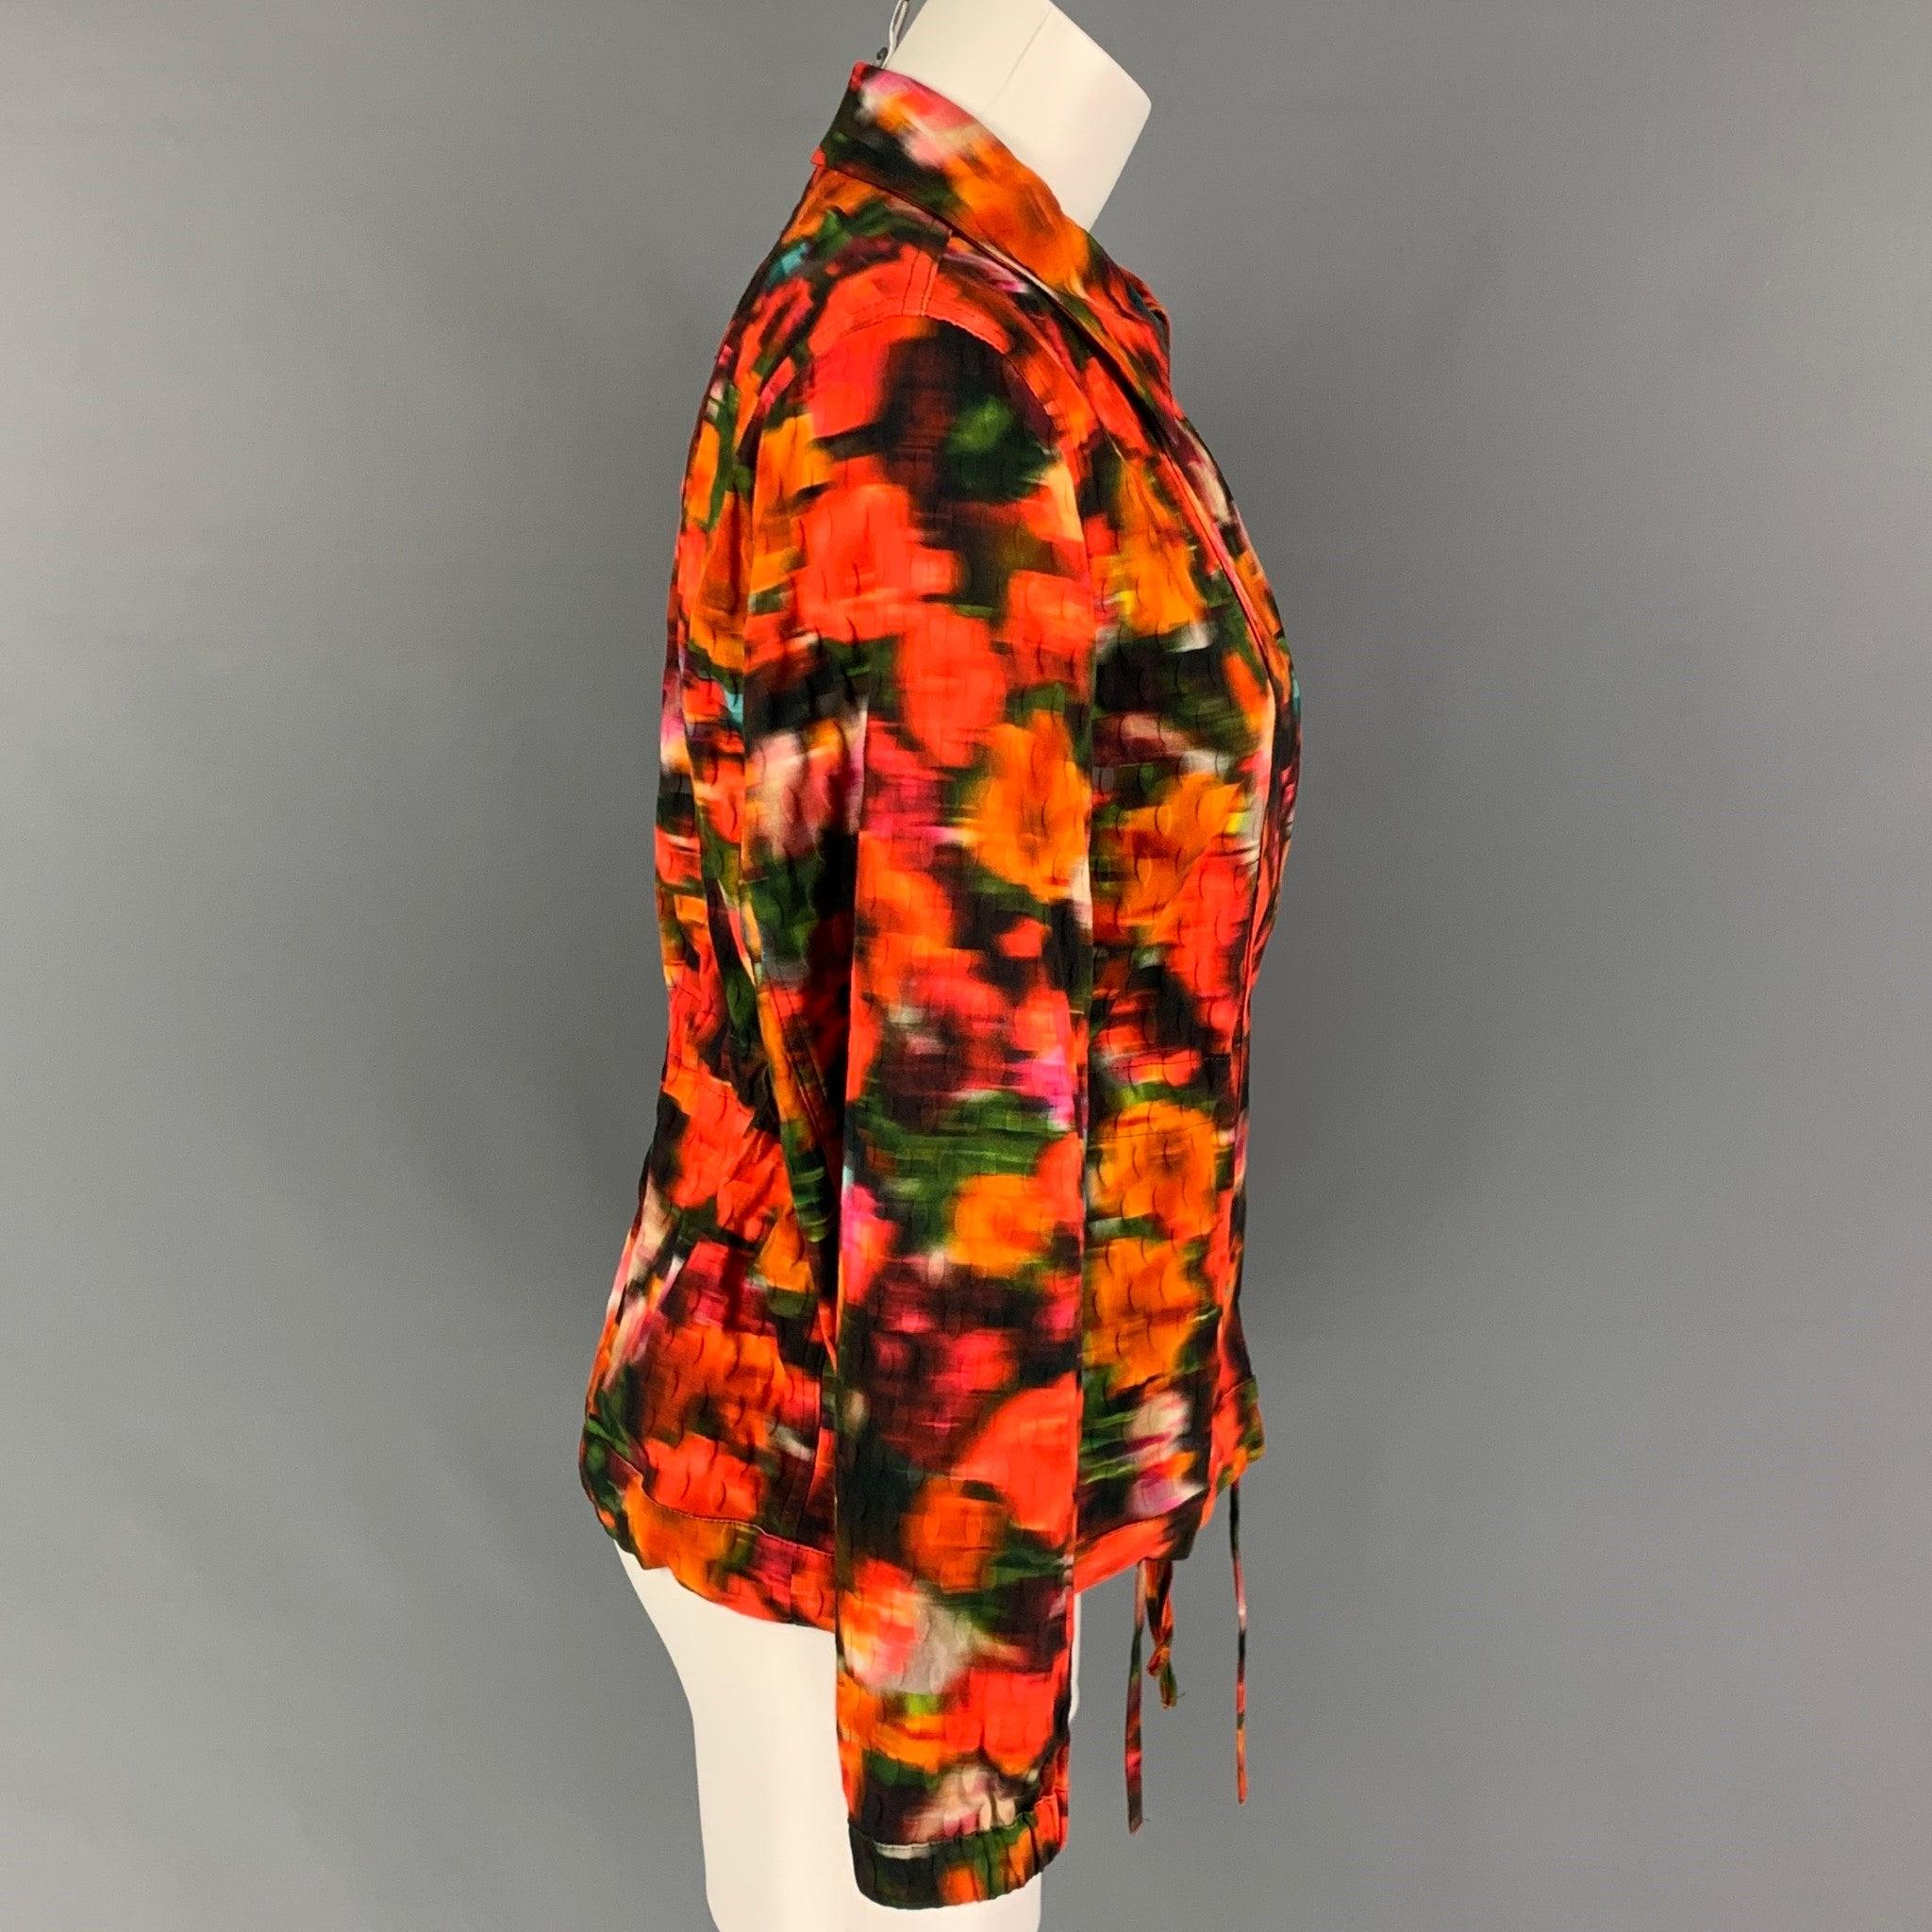 DRIES VAN NOTEN jacket comes in a multi-color abstract cotton blend featuring a spread collar, drawstring waist, and a hidden placket closure.
New with tags.
 

Marked:   36 

Measurements: 
 
Shoulder: 15 inches  Bust:
34 inches  Sleeve: 23 inches 